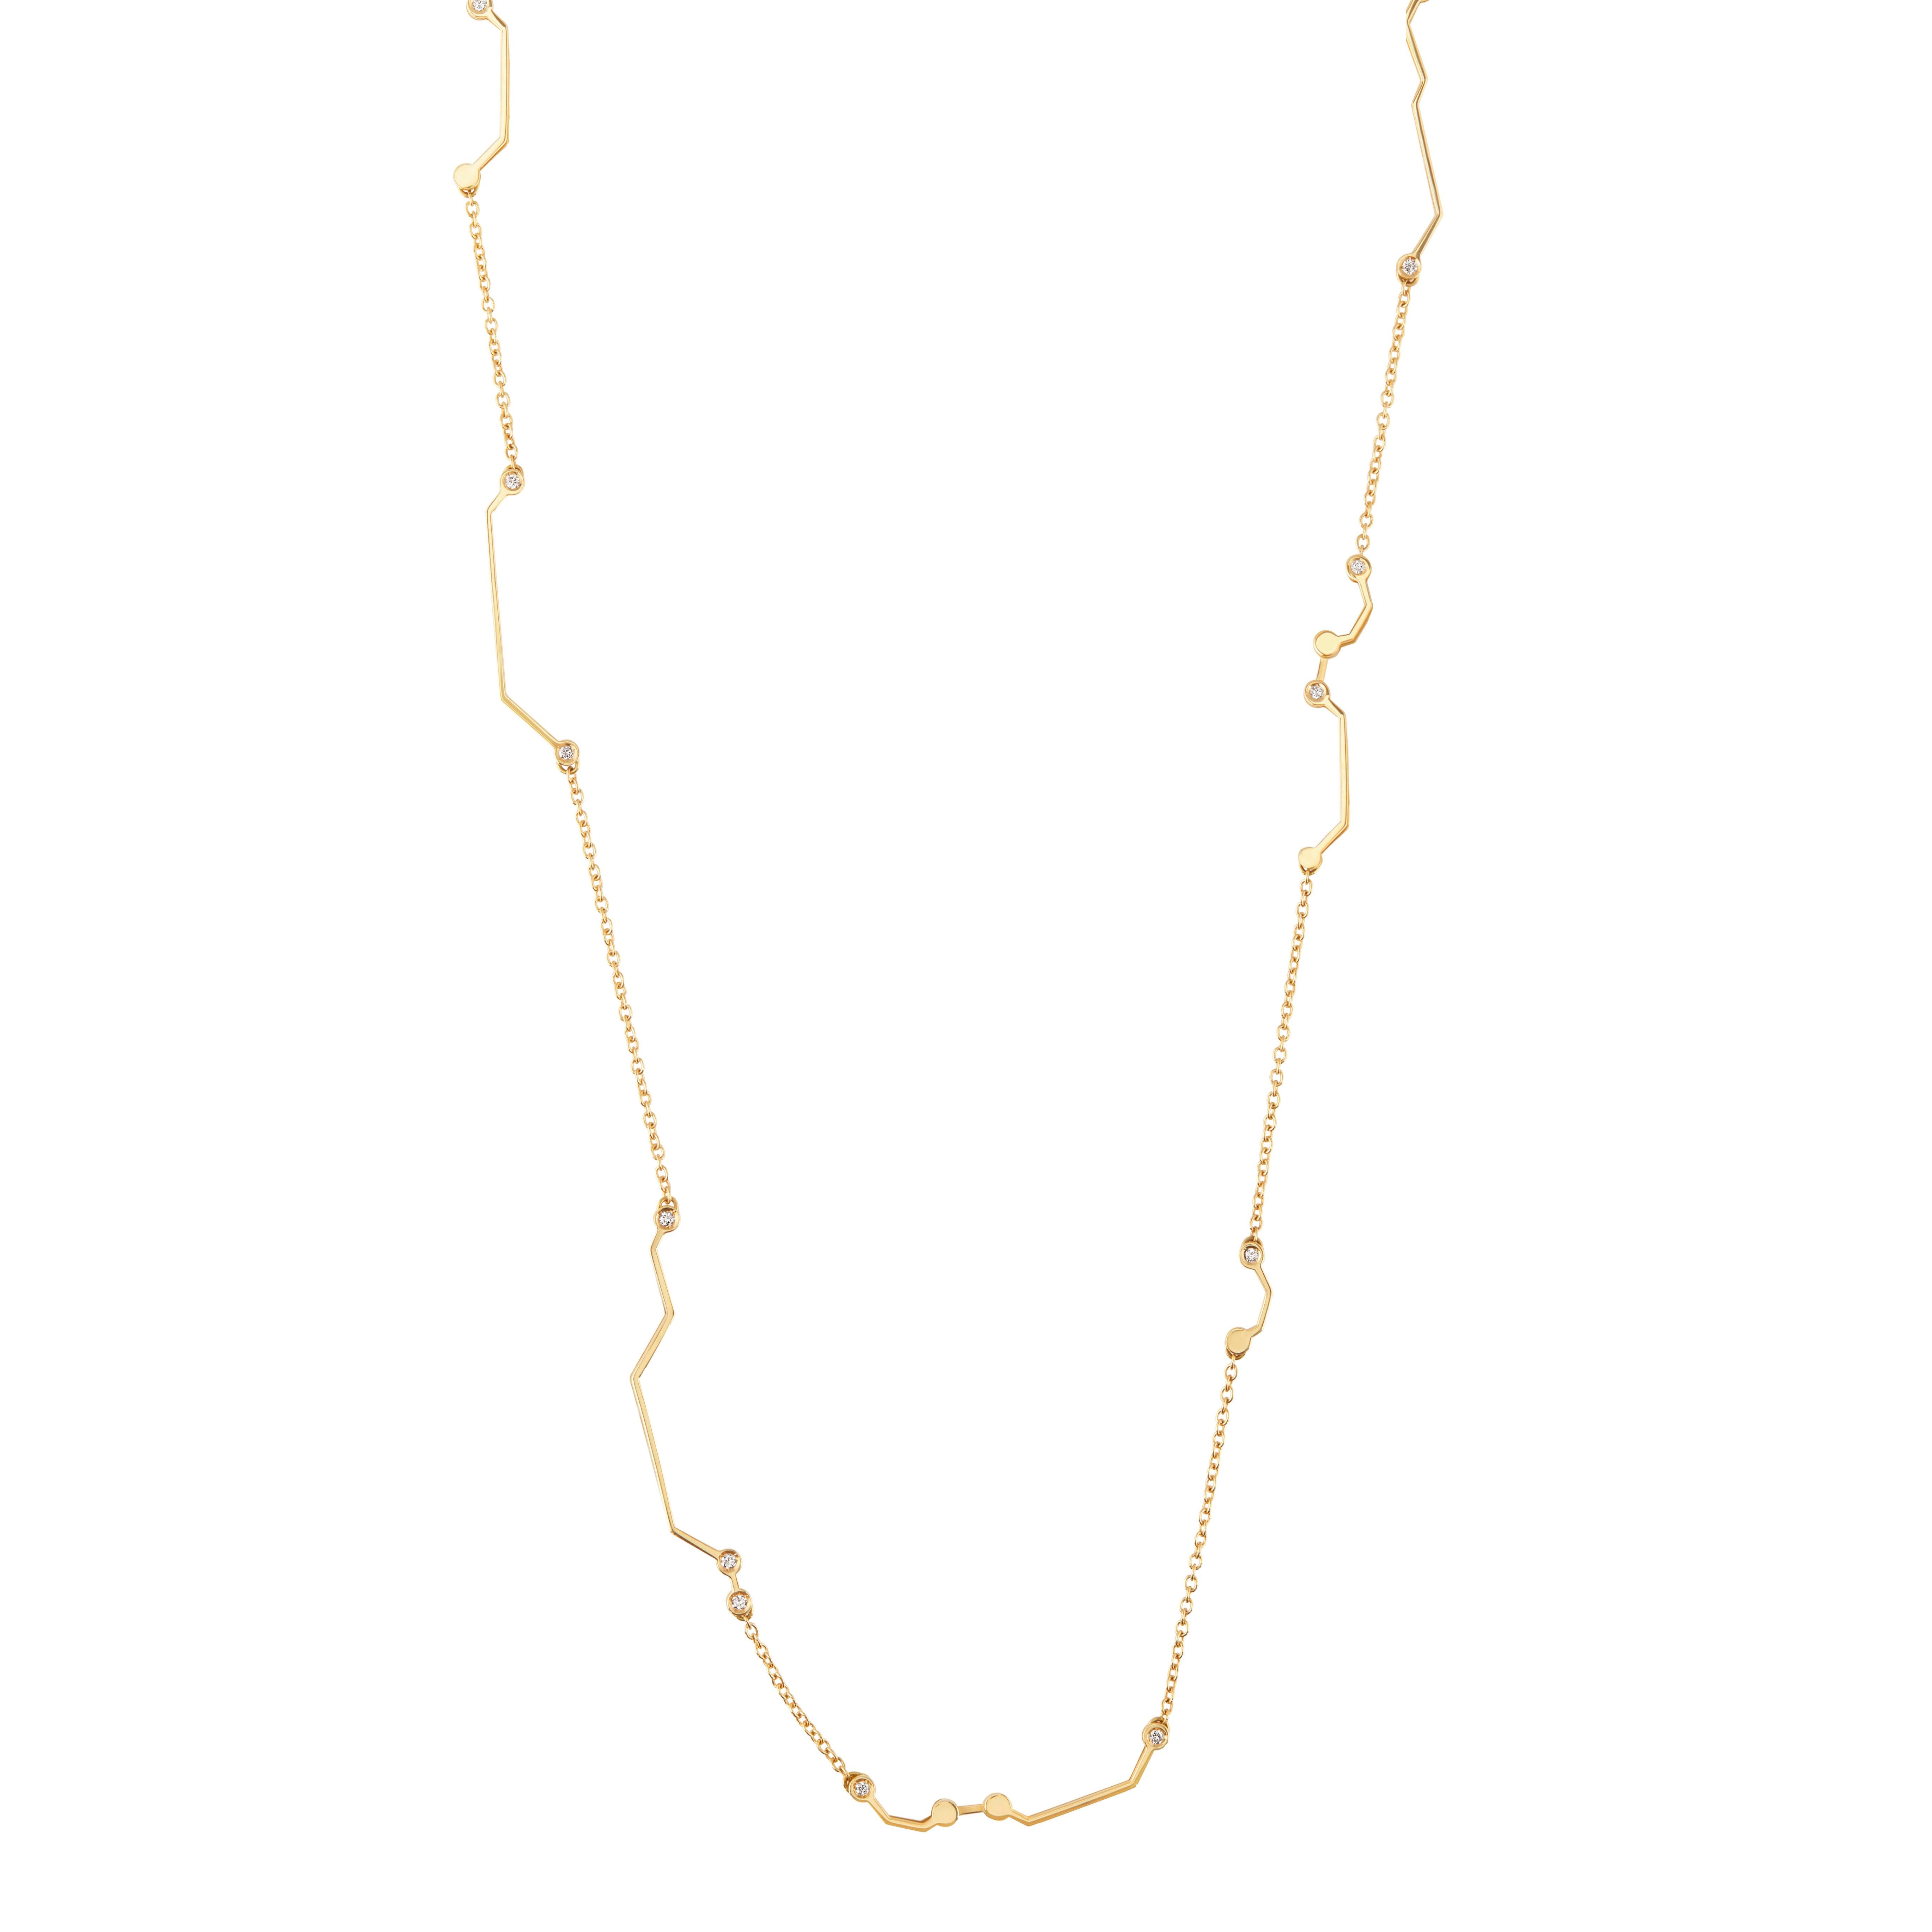 Round Cut Nathalie Jean Contemporary 0.468 Carat Diamond Yellow Gold Link Chain Necklace For Sale